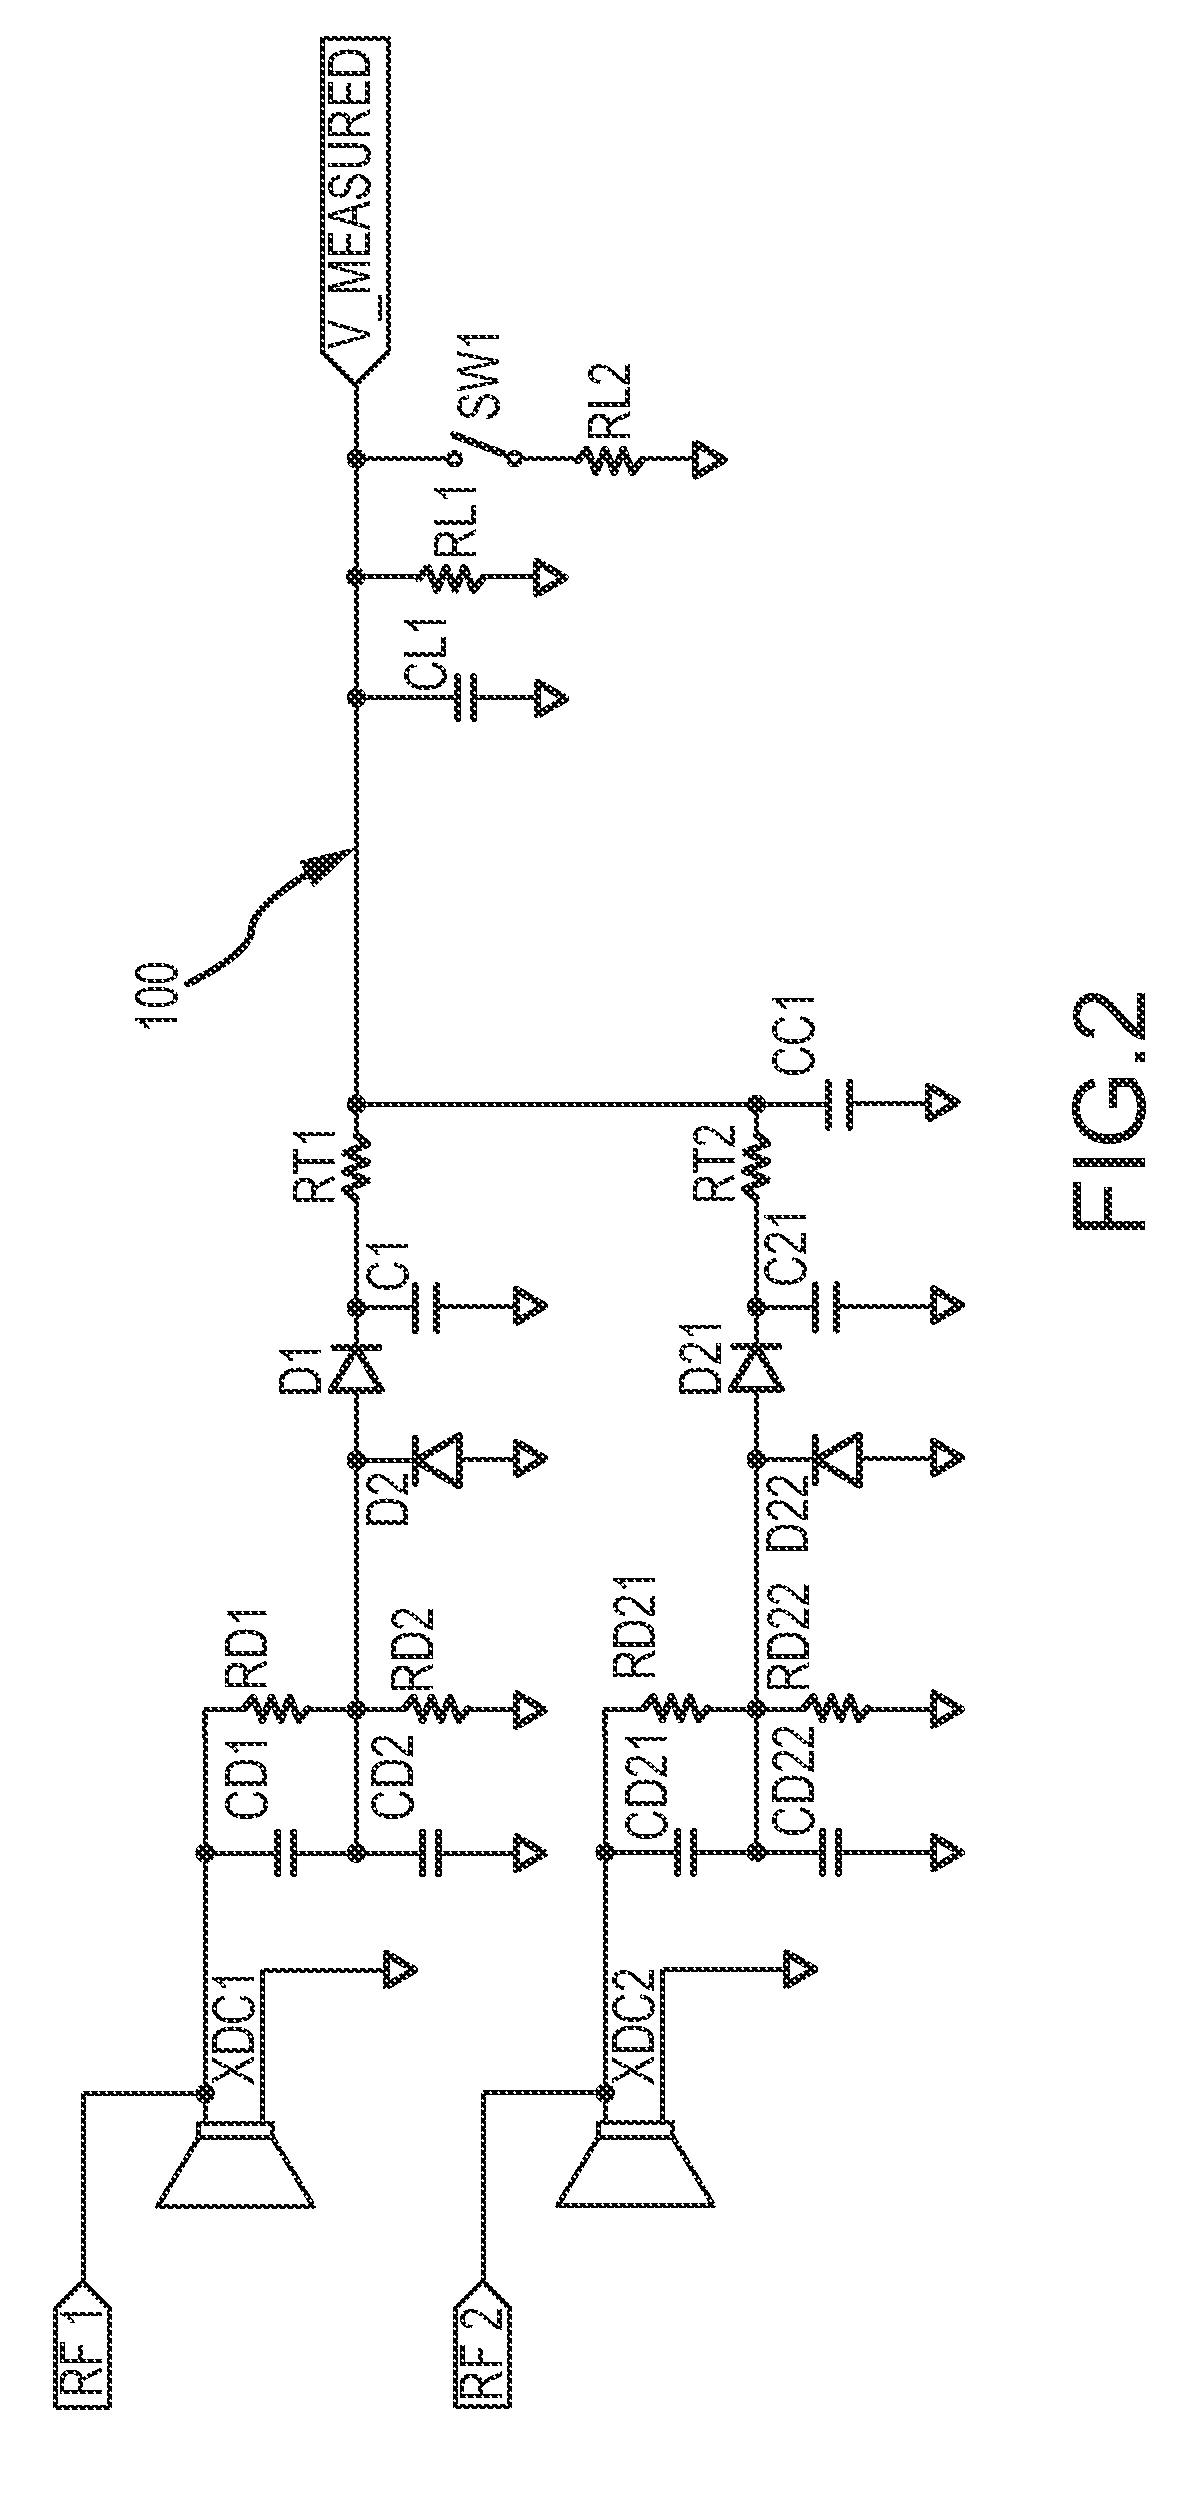 Method and system for using common subchannel to assess the operating characteristics of transducers